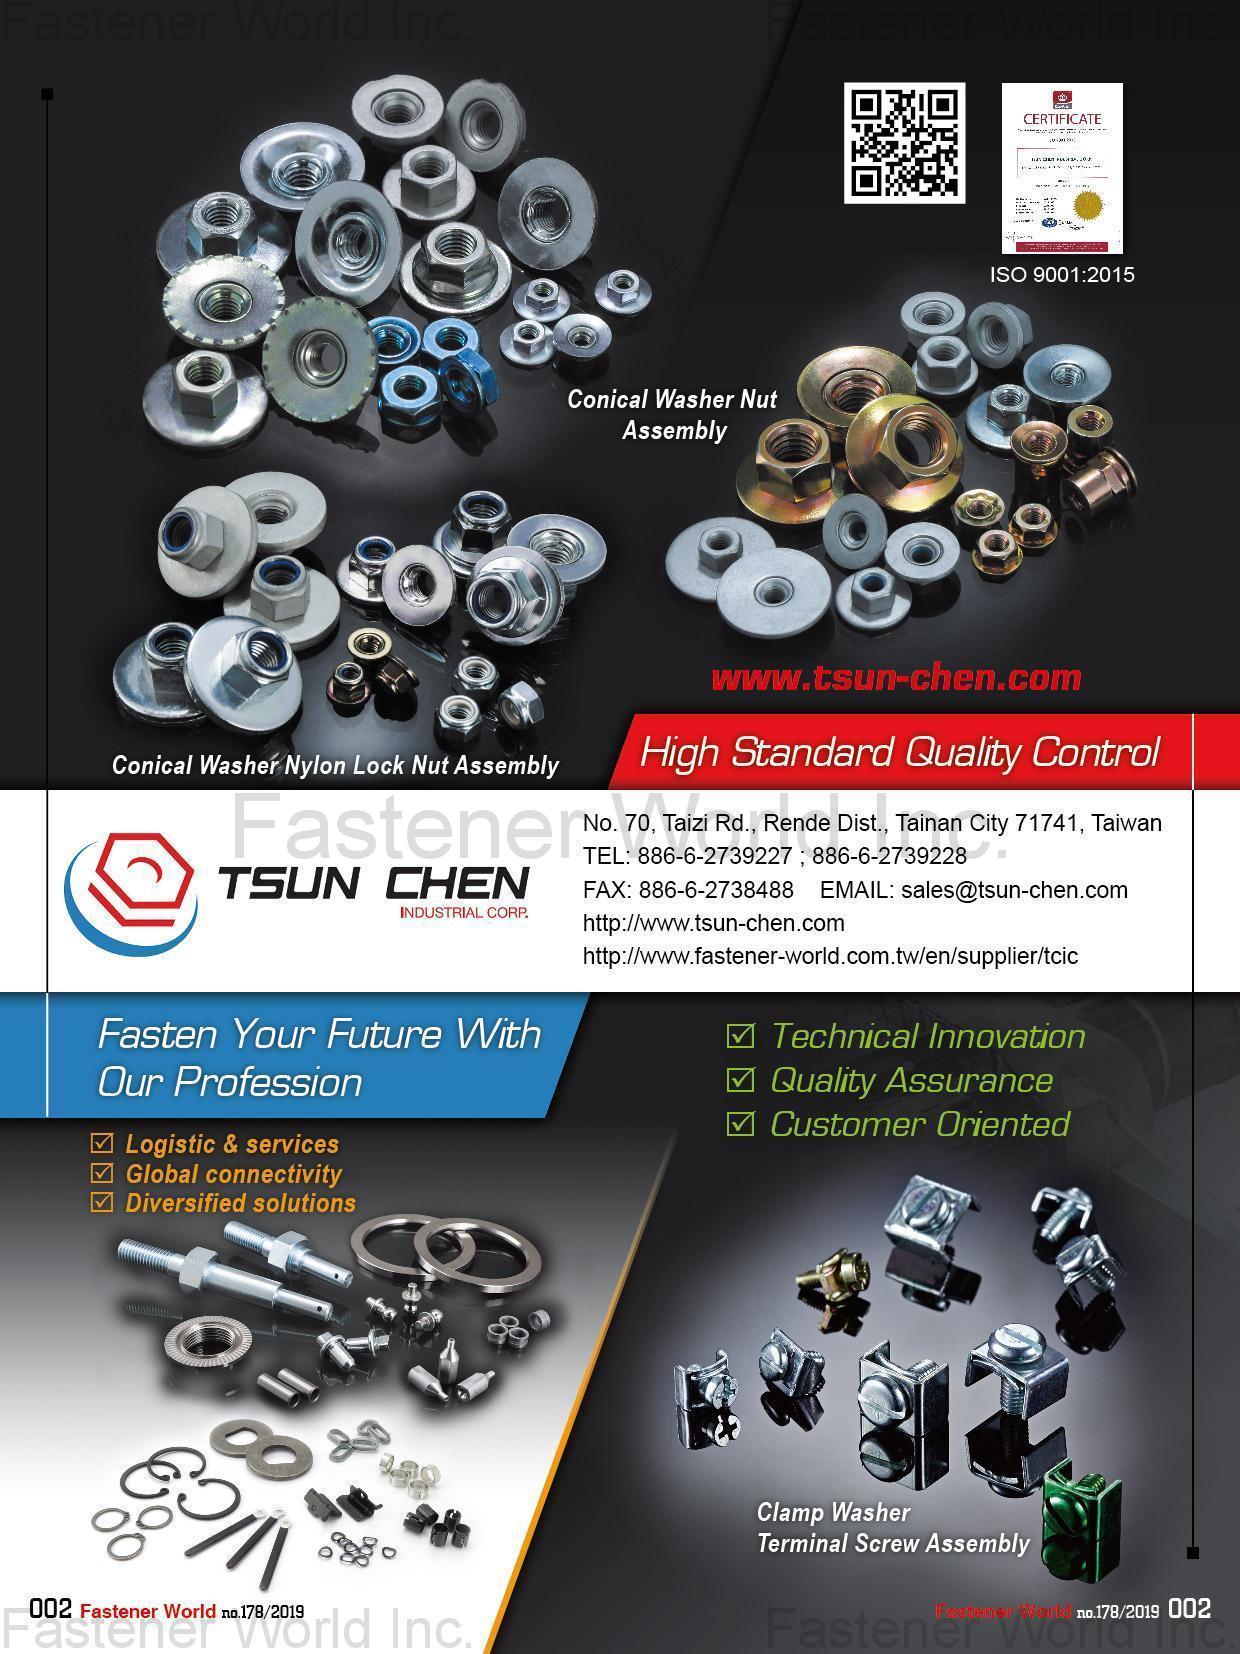 TSUN CHEN INDUSTRIAL CORP.   -  Professional Assembly Manufacturer , Conical Washer Nut Assembly | Conical Washer Nylon Lock Nut Assembly, Clamp Washer Terminal Screw Assembly , Conical Washer Nuts